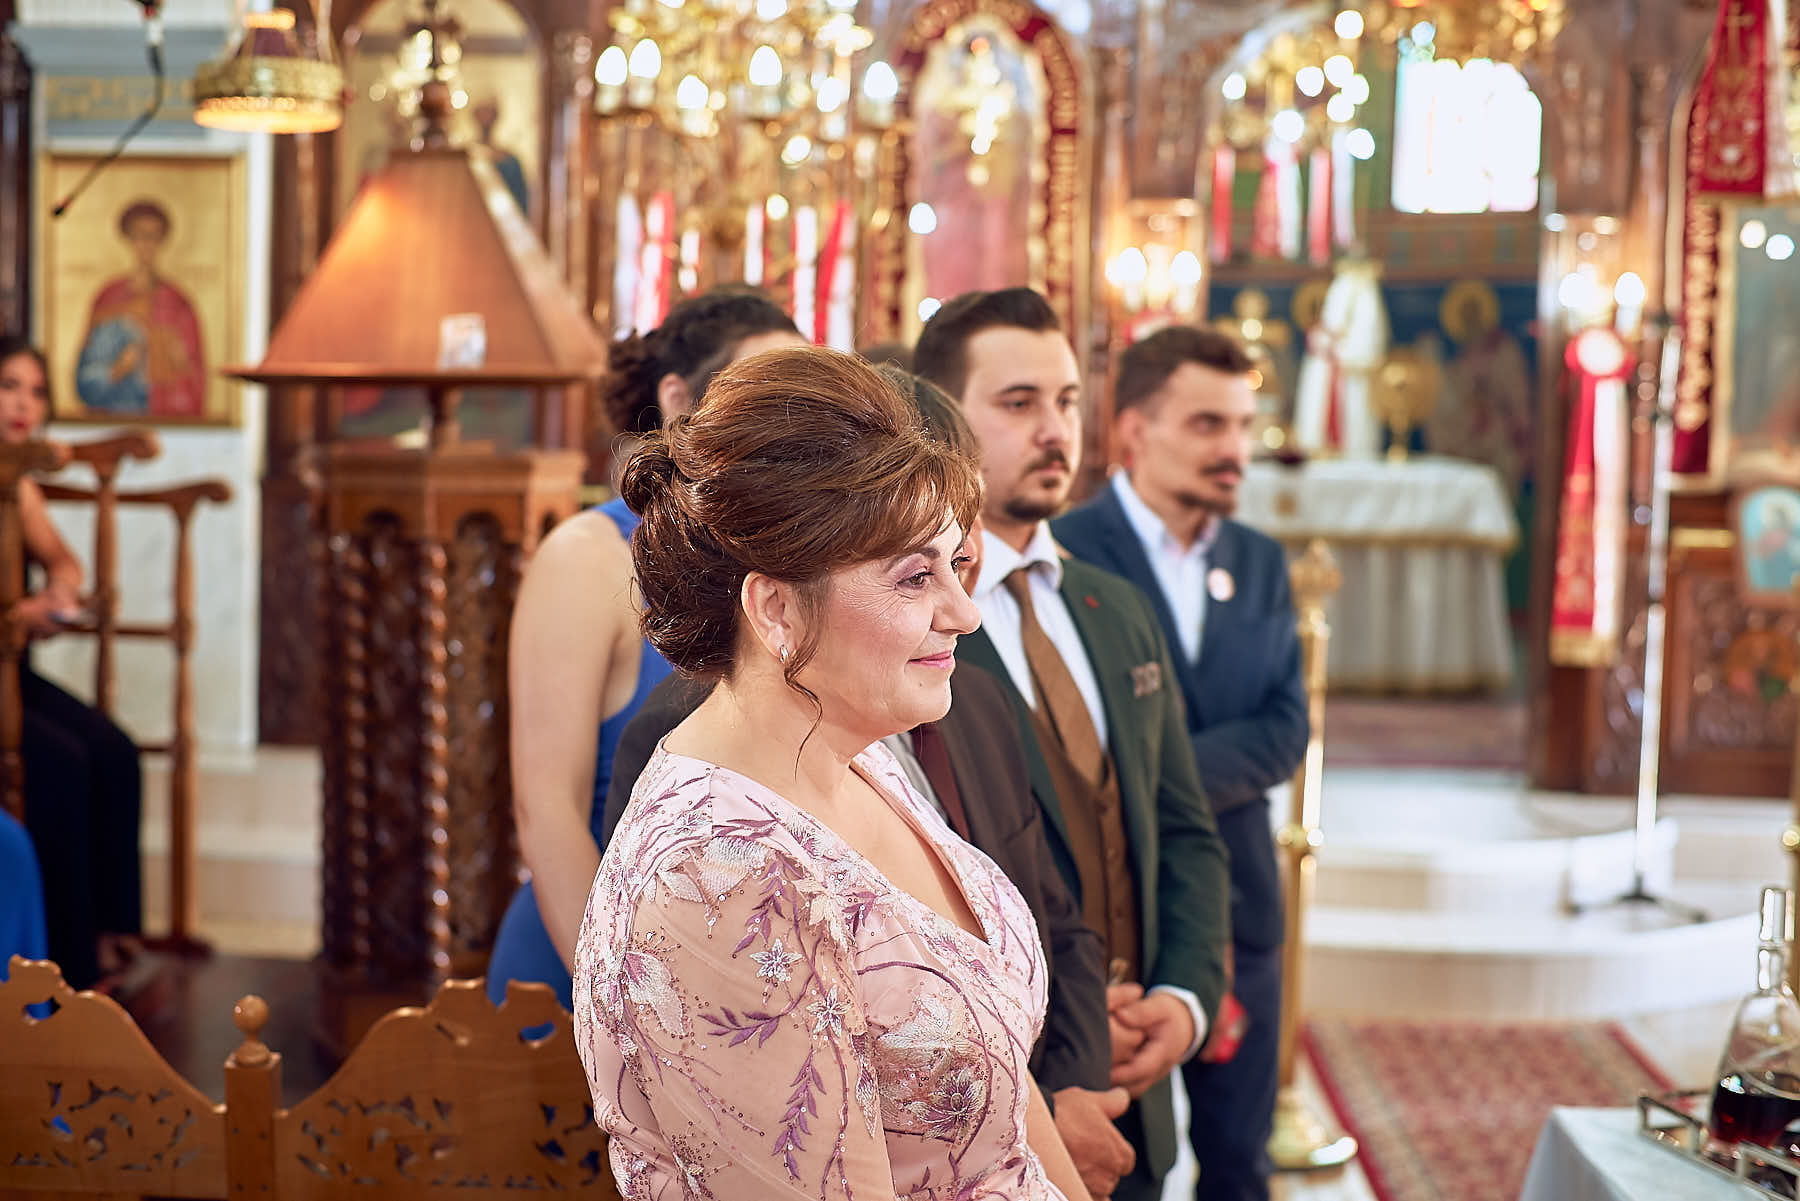 A relative and friends during the ceremony